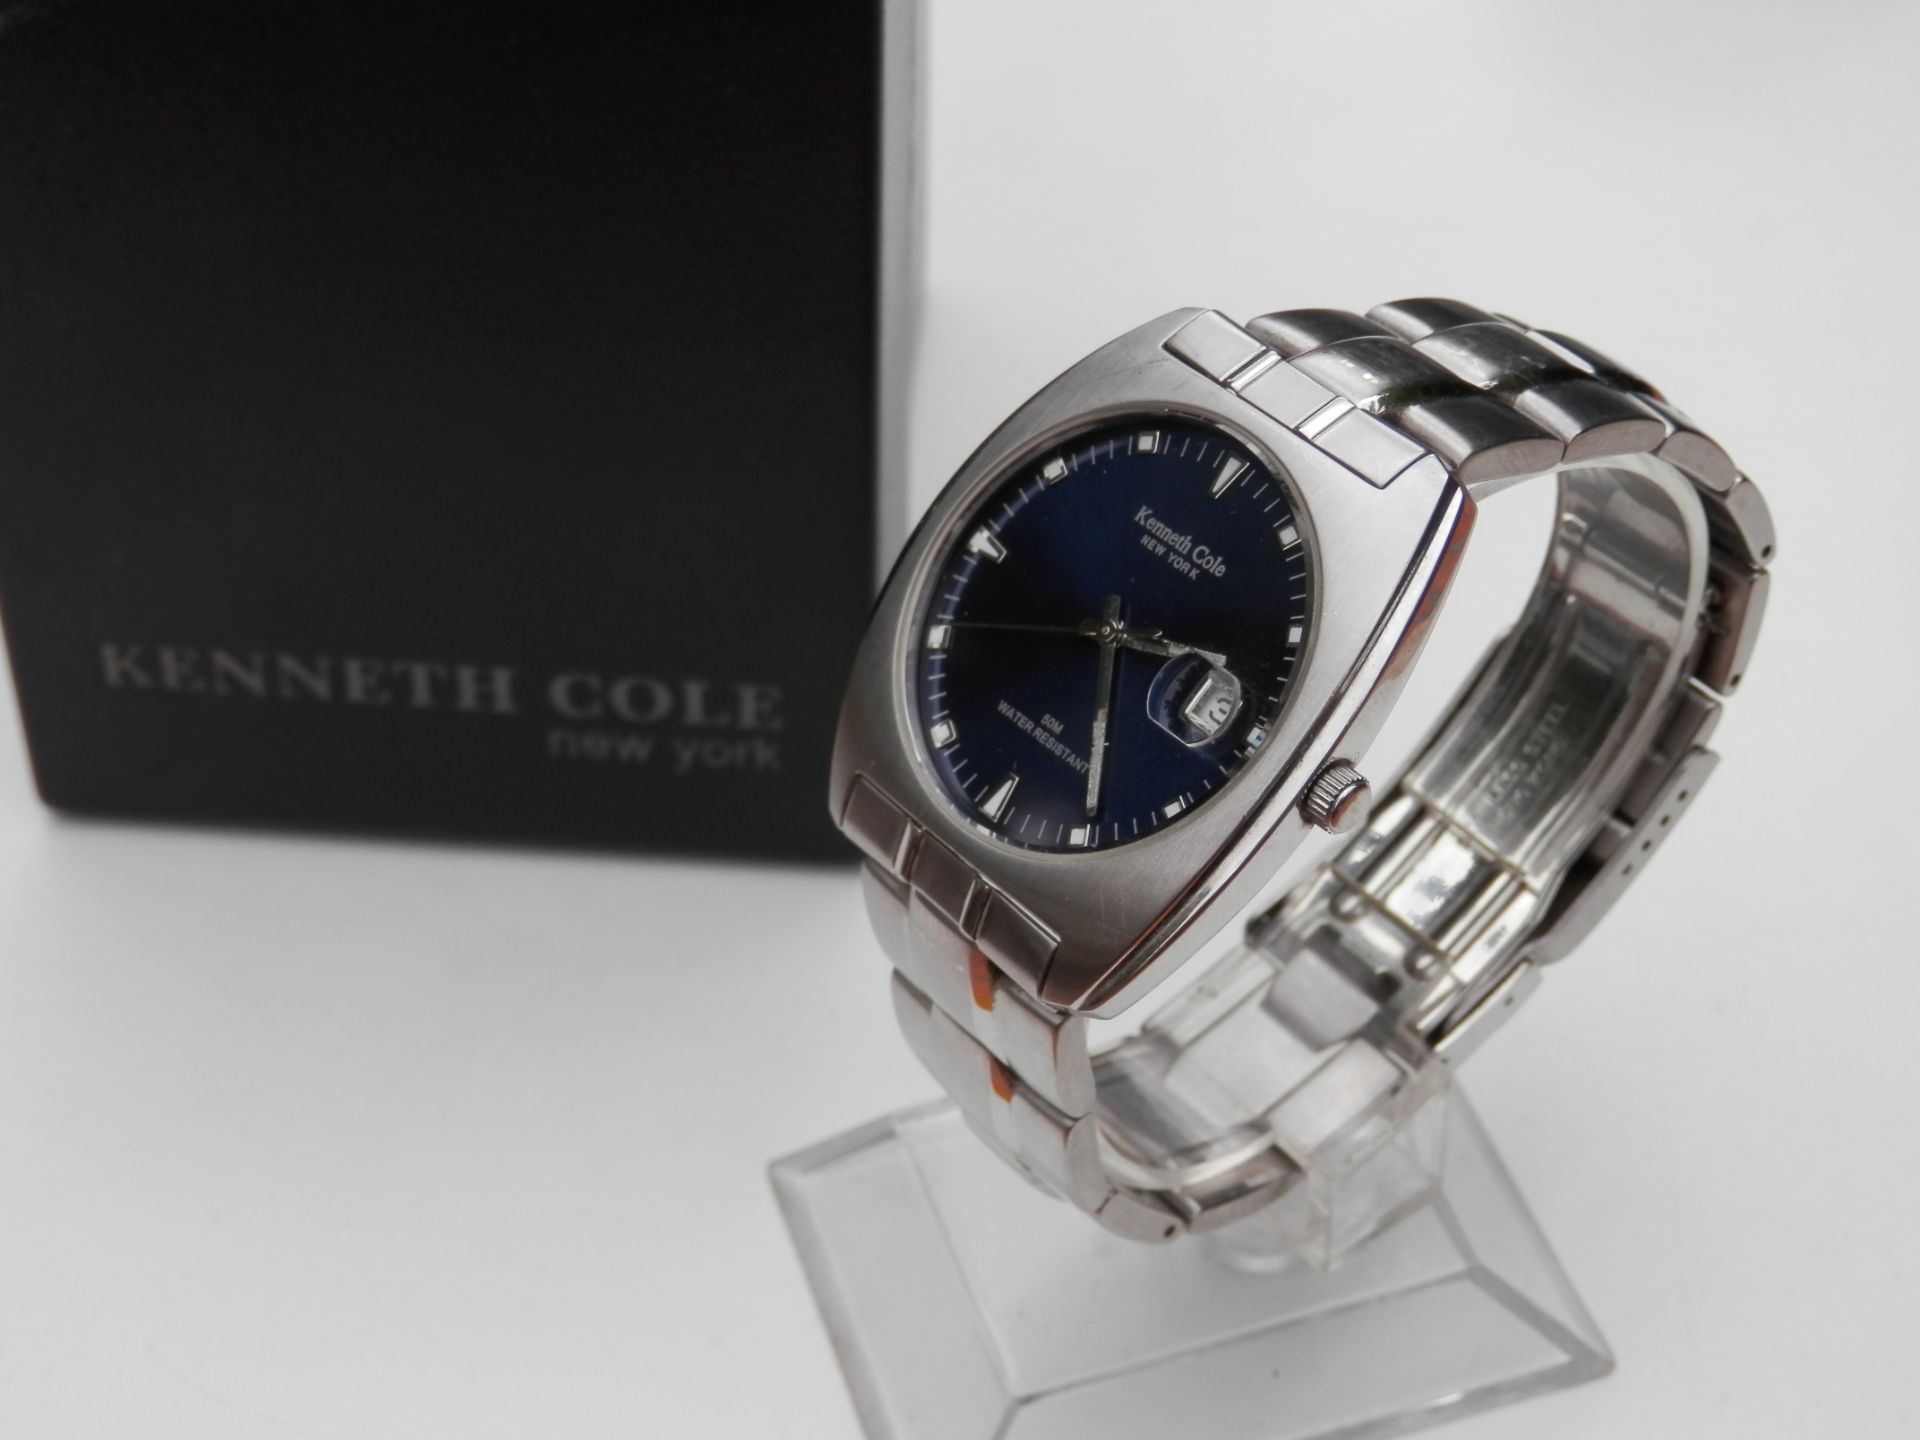 GENTS BOXED KENNETH COLE NEW YORK, FULL STAINLESS 50M WR QUARTZ DATE WATCH, FULLY WORKING. RRP $125 - Image 4 of 8